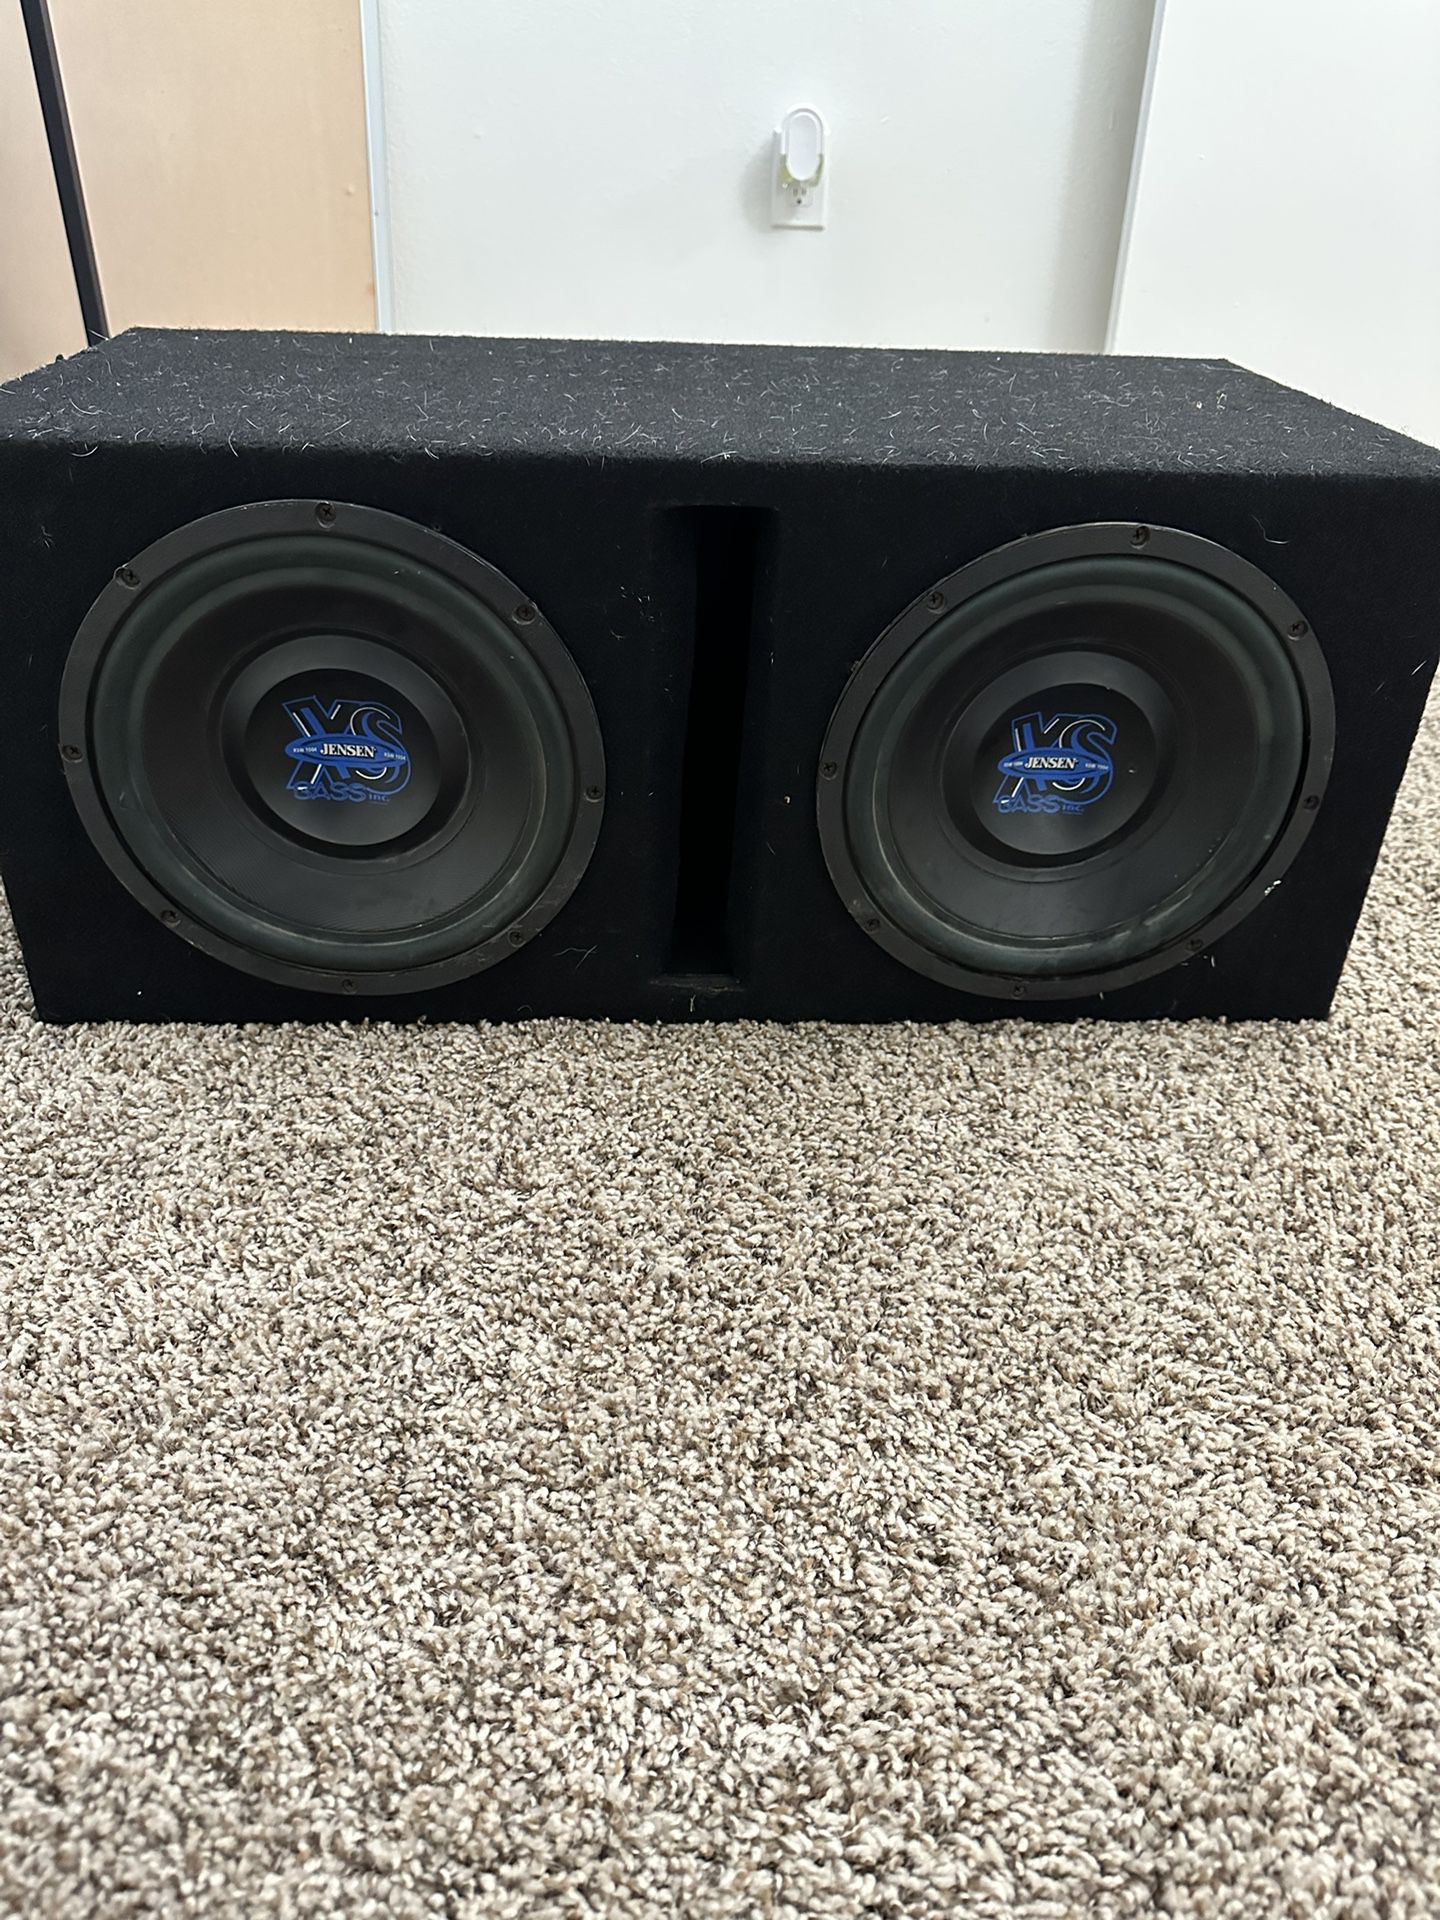 2 10” Subwoofers With Box